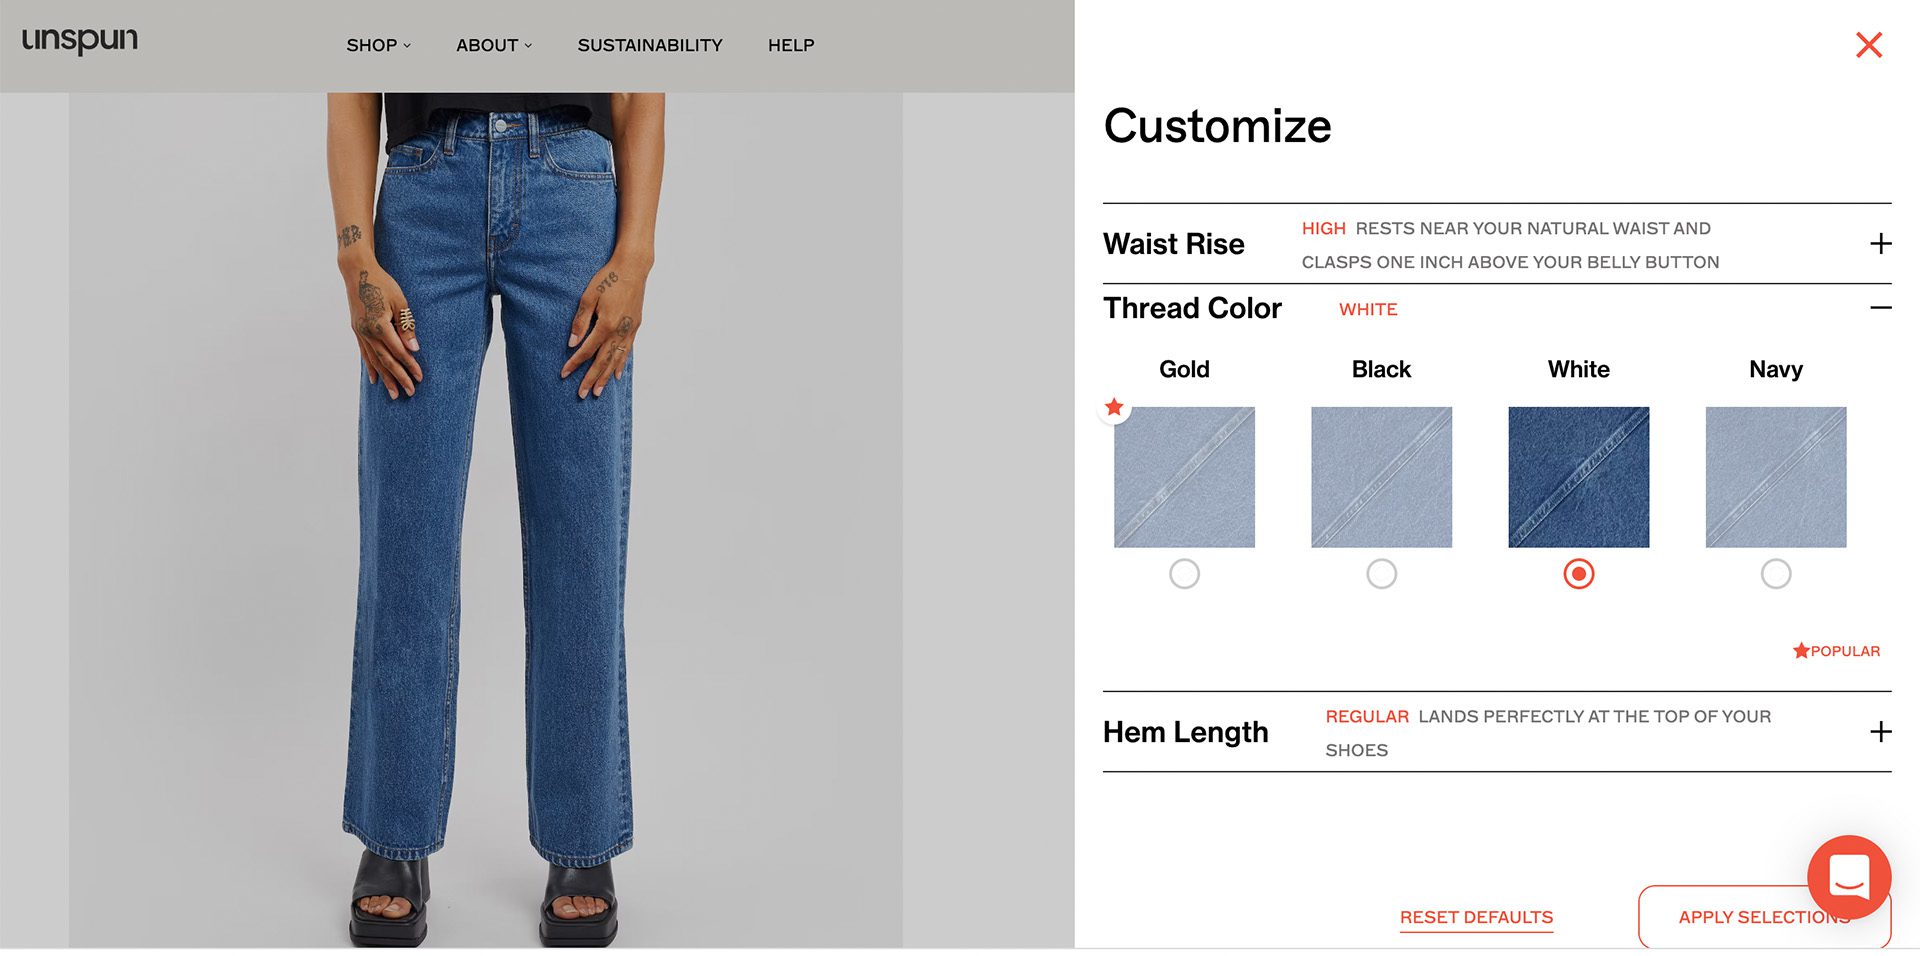 Our writer's unspun jeans choices;